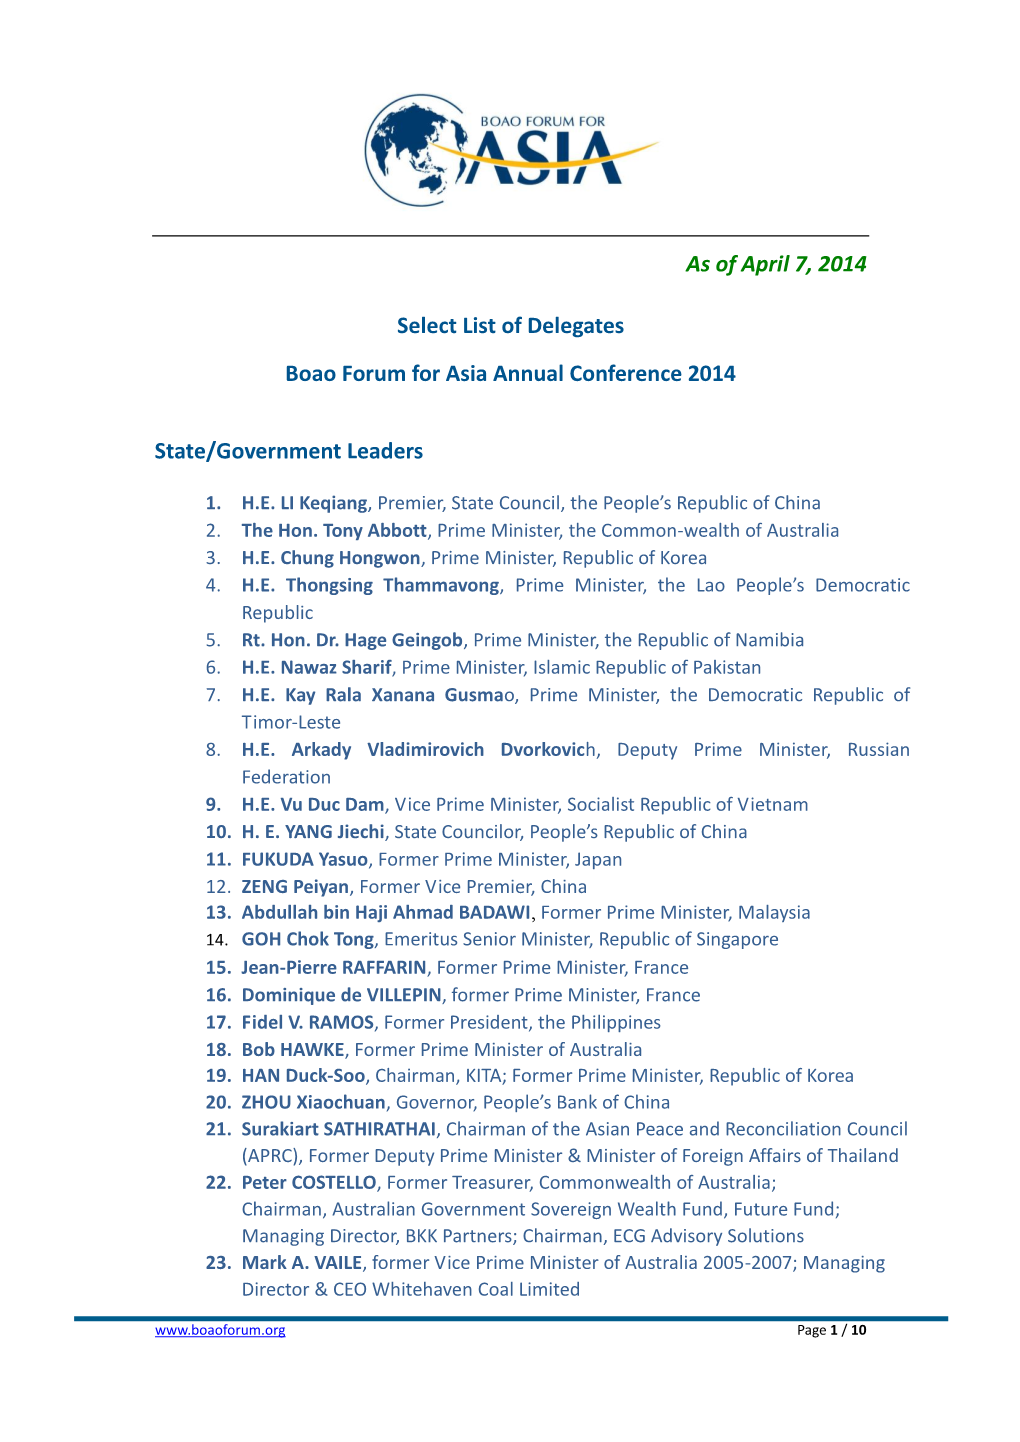 As of April 7, 2014 Select List of Delegates Boao Forum for Asia